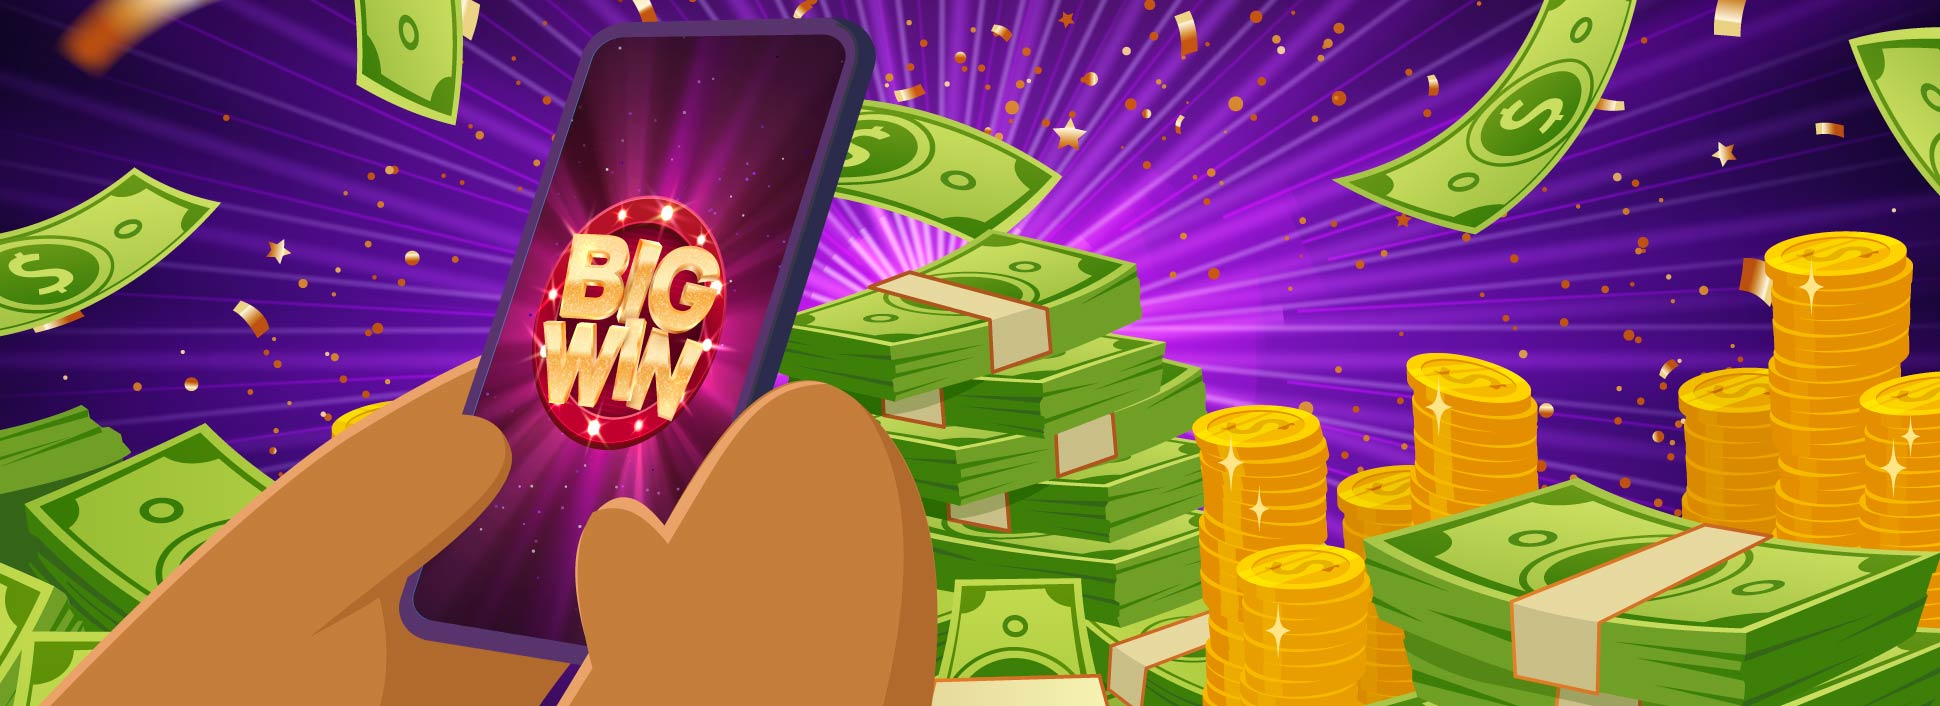 new jersey online casino slots Services - How To Do It Right